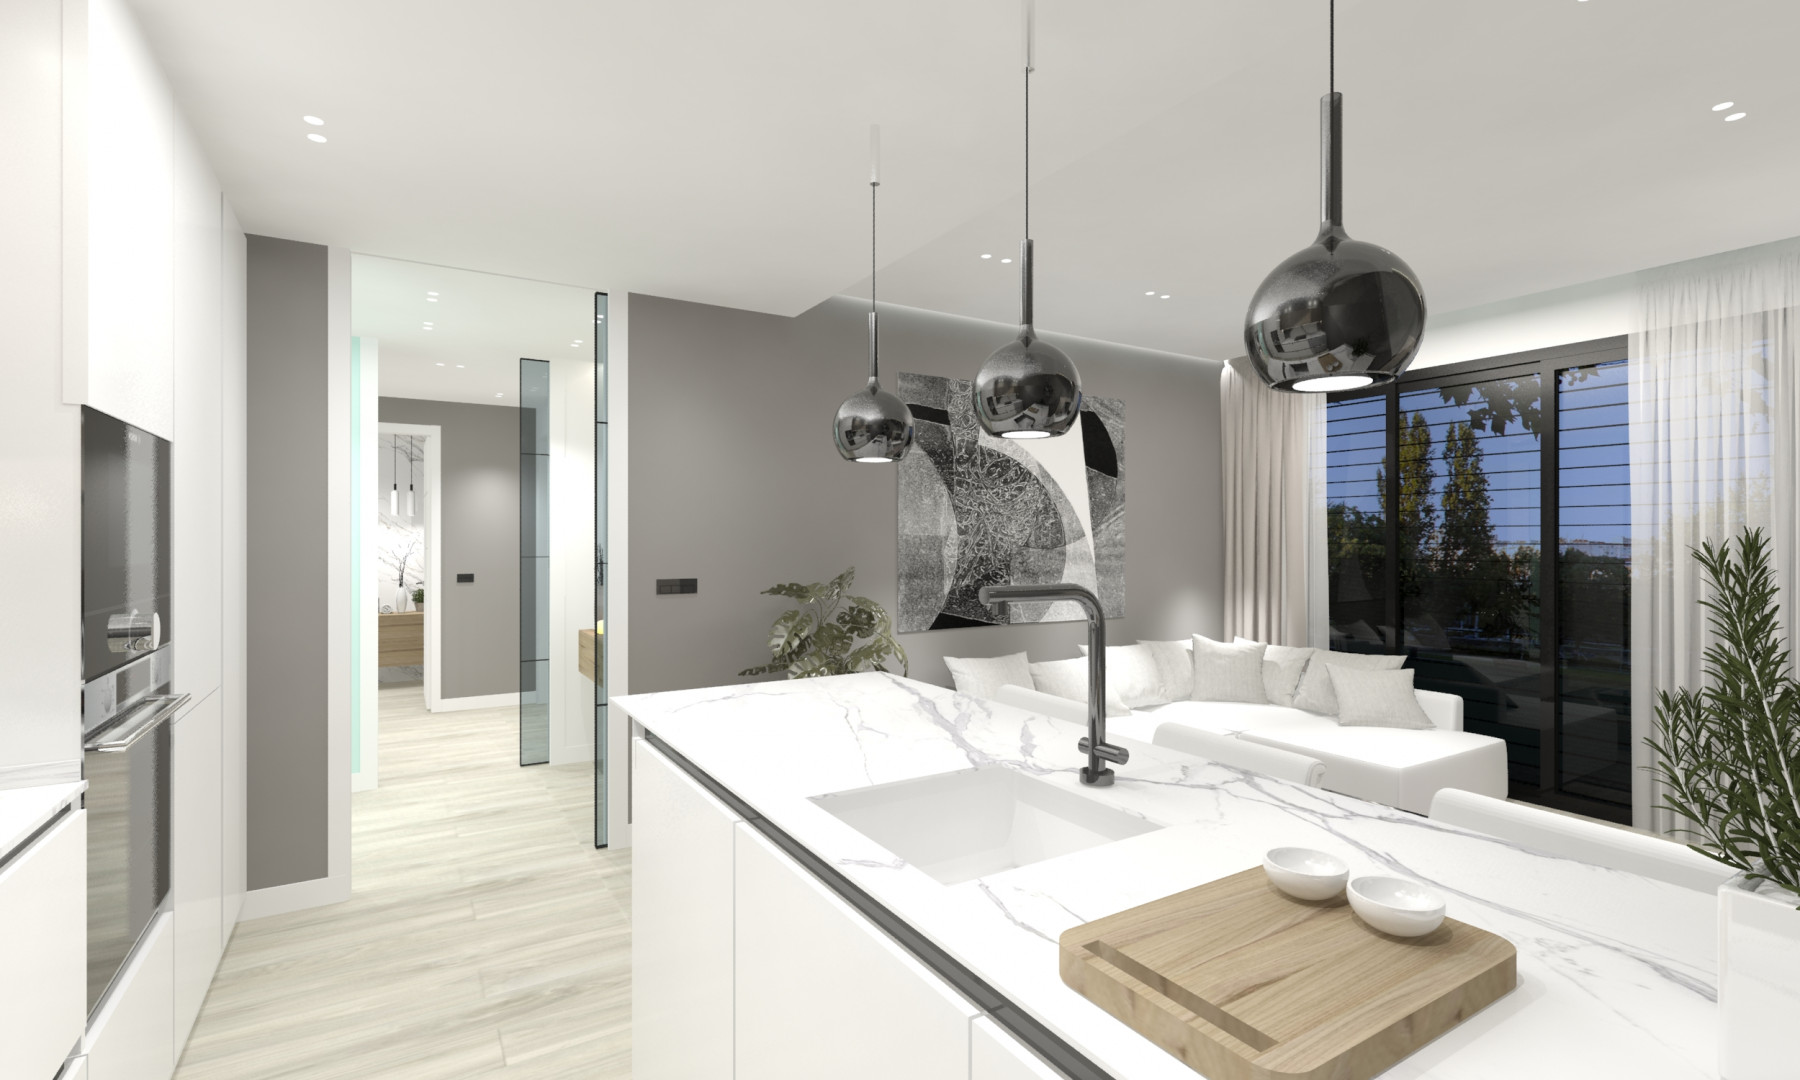 BUILDING OF 5 MODERN DESIGN APARTMENTS WITH HIGH PROFITABILITY IN BARCELONA